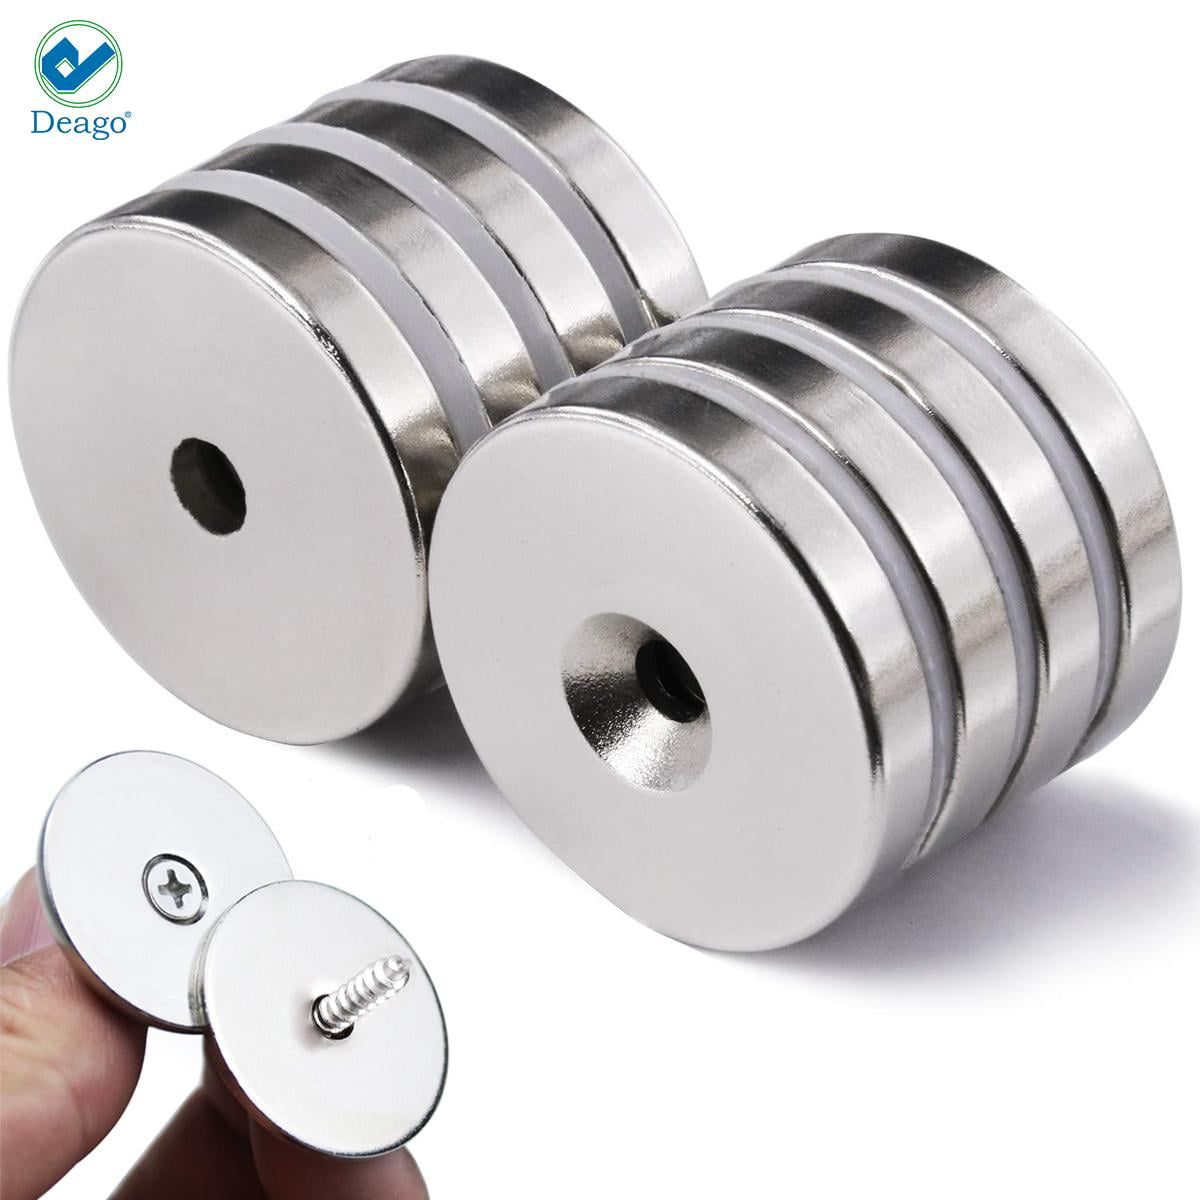 10mm x 3mm Neodymium Countersunk Ring Magnets N35 New Super Strong -US seller 